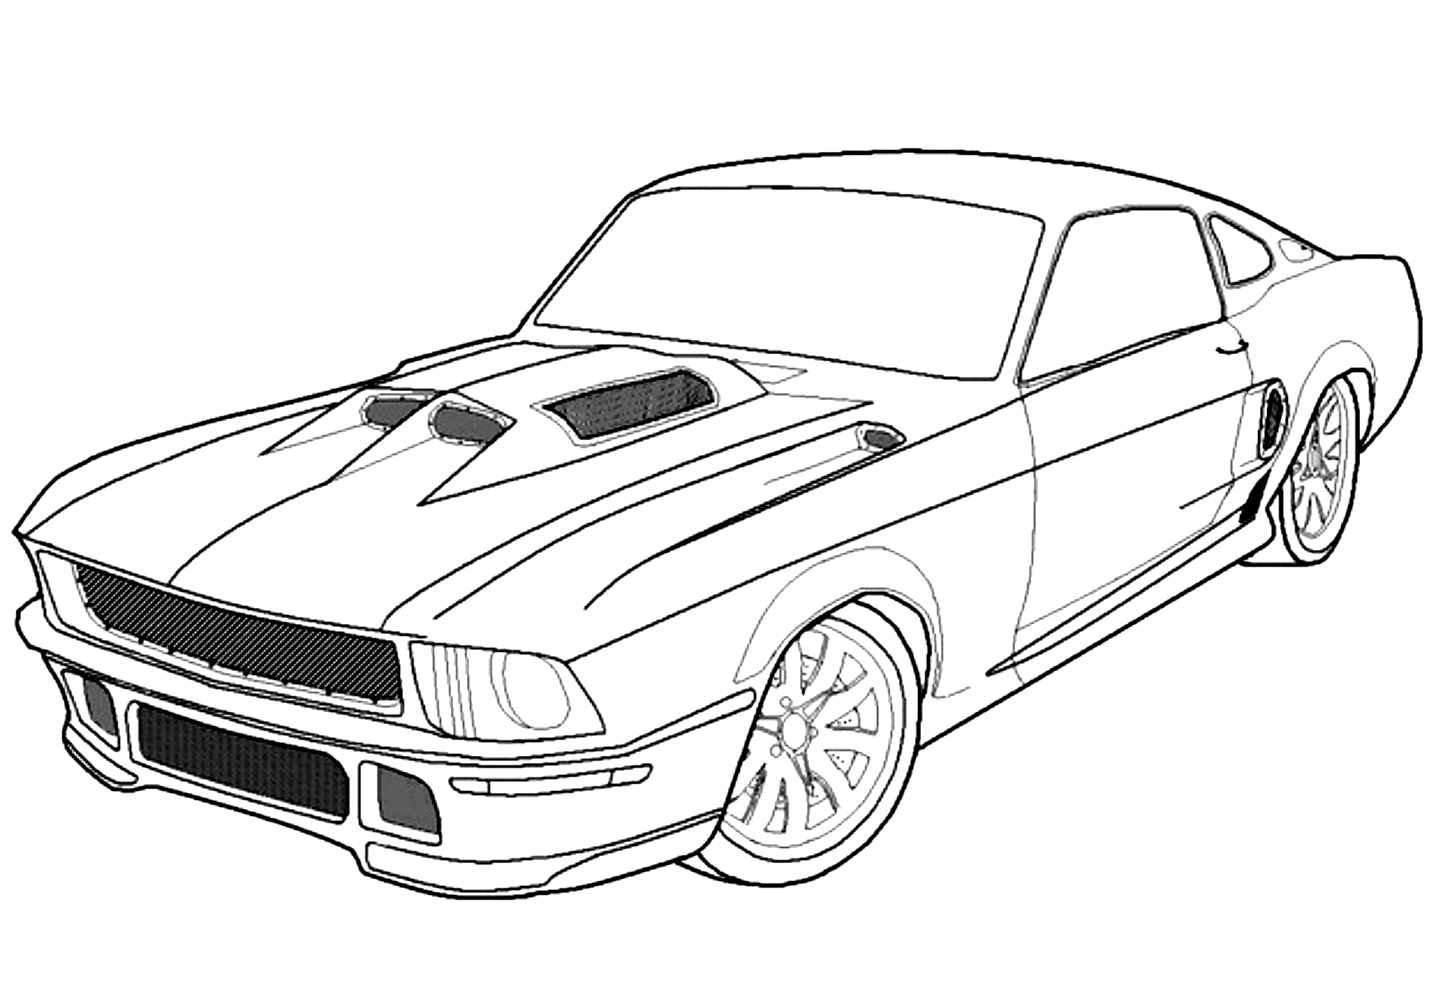 Drawing 20 from Automobiles coloring page to print and coloring